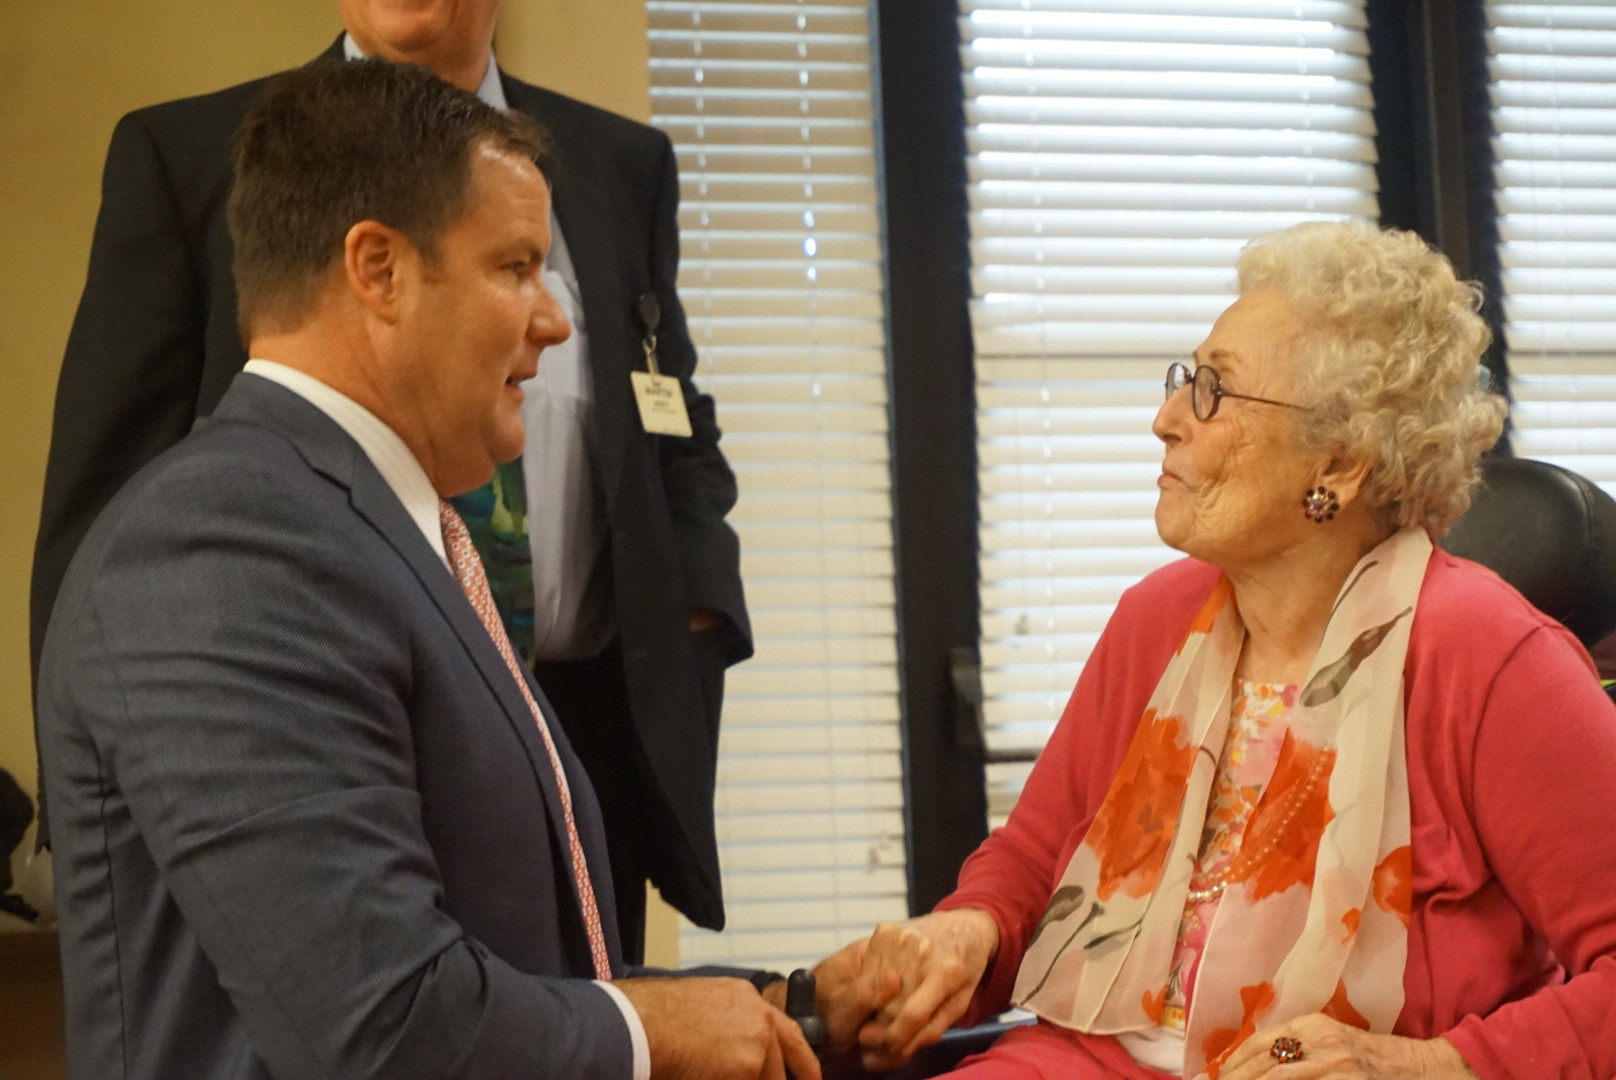 State Sen. Aaron Bean speaks with Shirley Stone, president of the River Garden Council of Residents